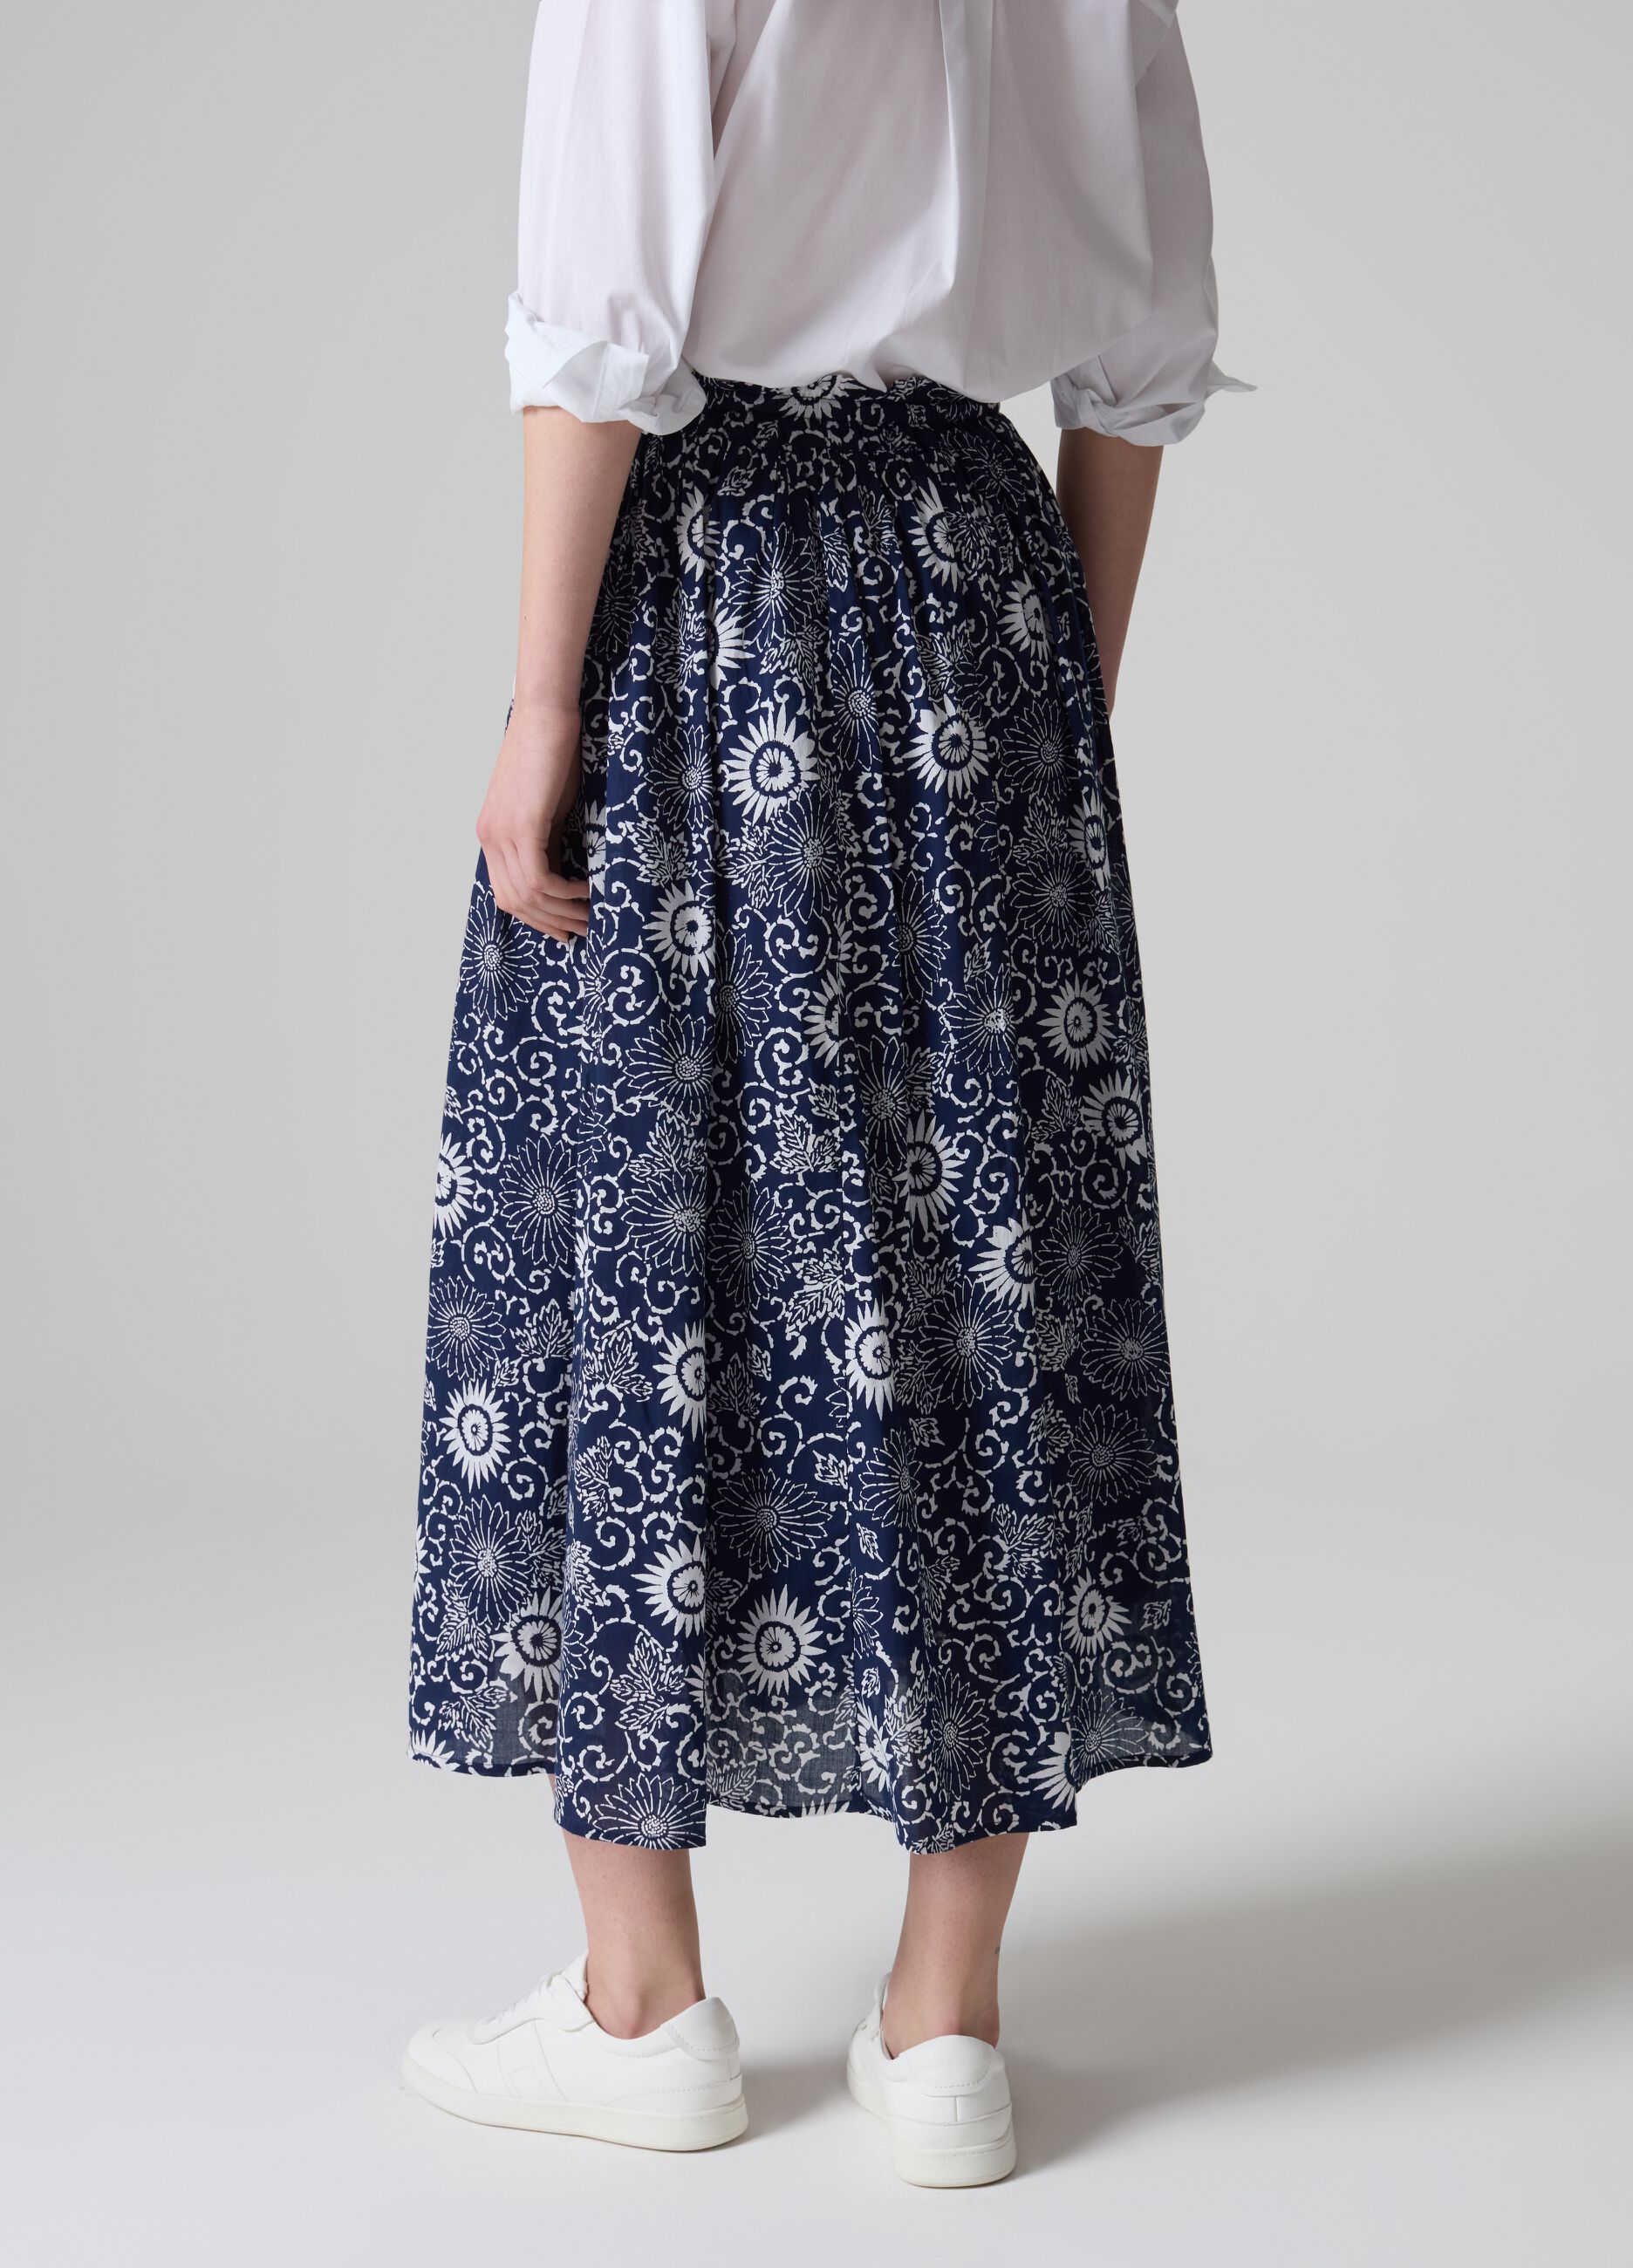 Full midi skirt with floral print